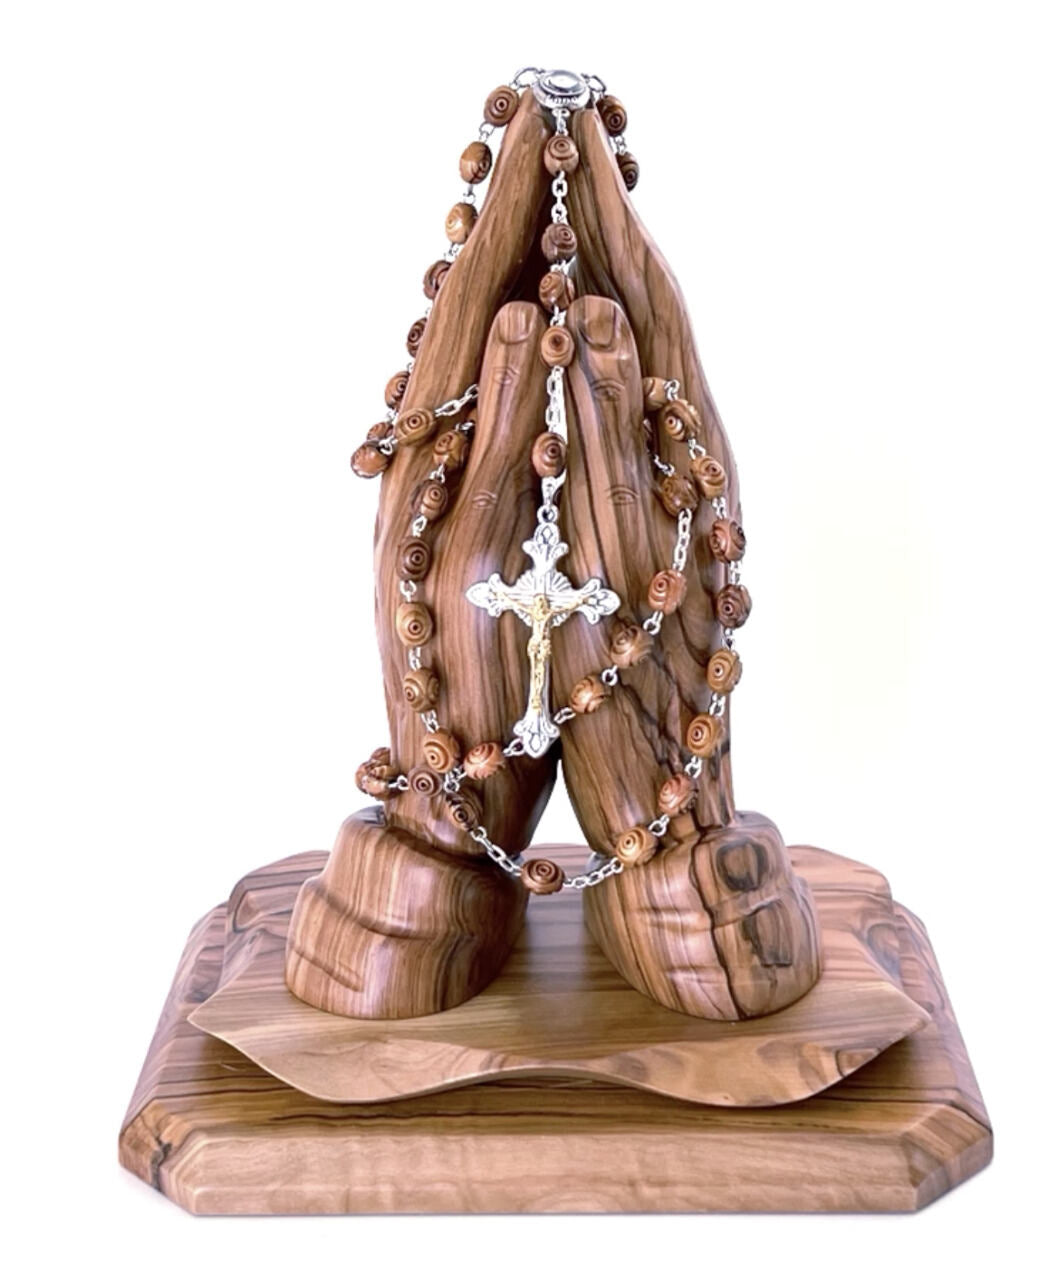 Grooved Wooden Bead Rosary, Centerpiece with Holy Land Soil